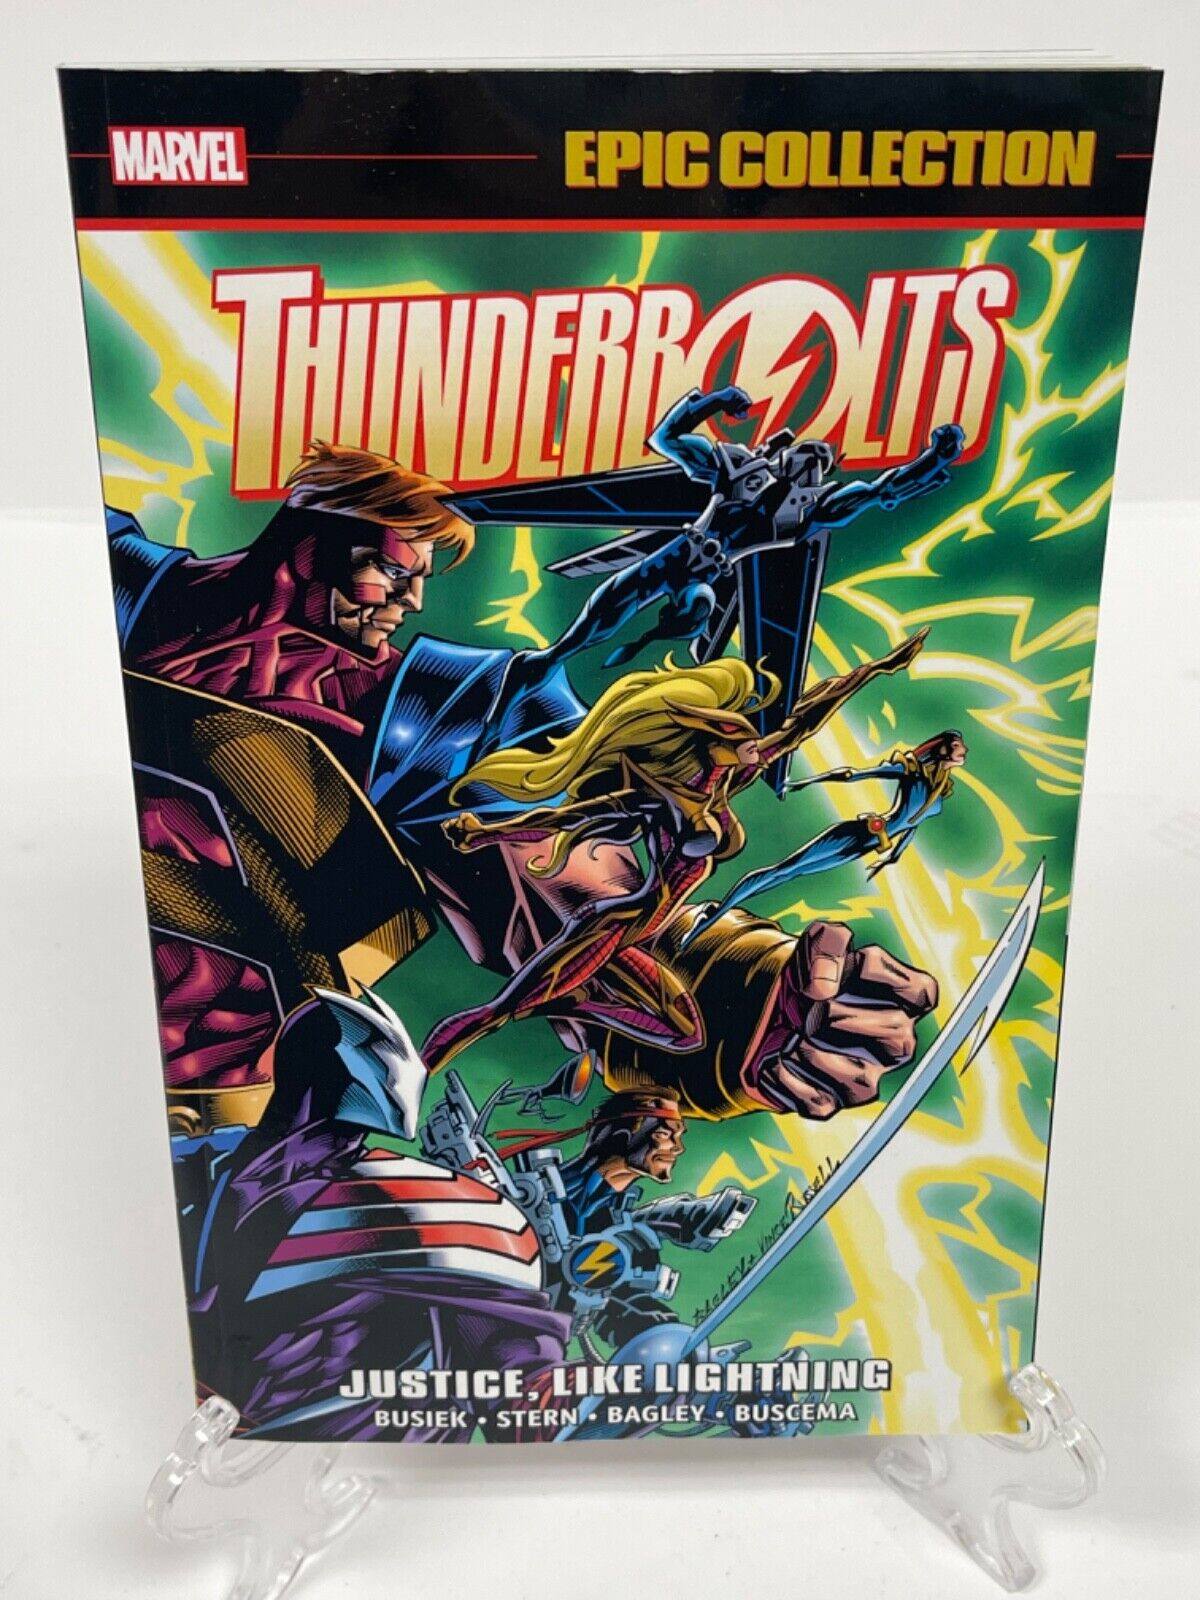 Thunderbolts Epic Collection Vol 1 Justice, Like Lightning New Marvel Comics TPB